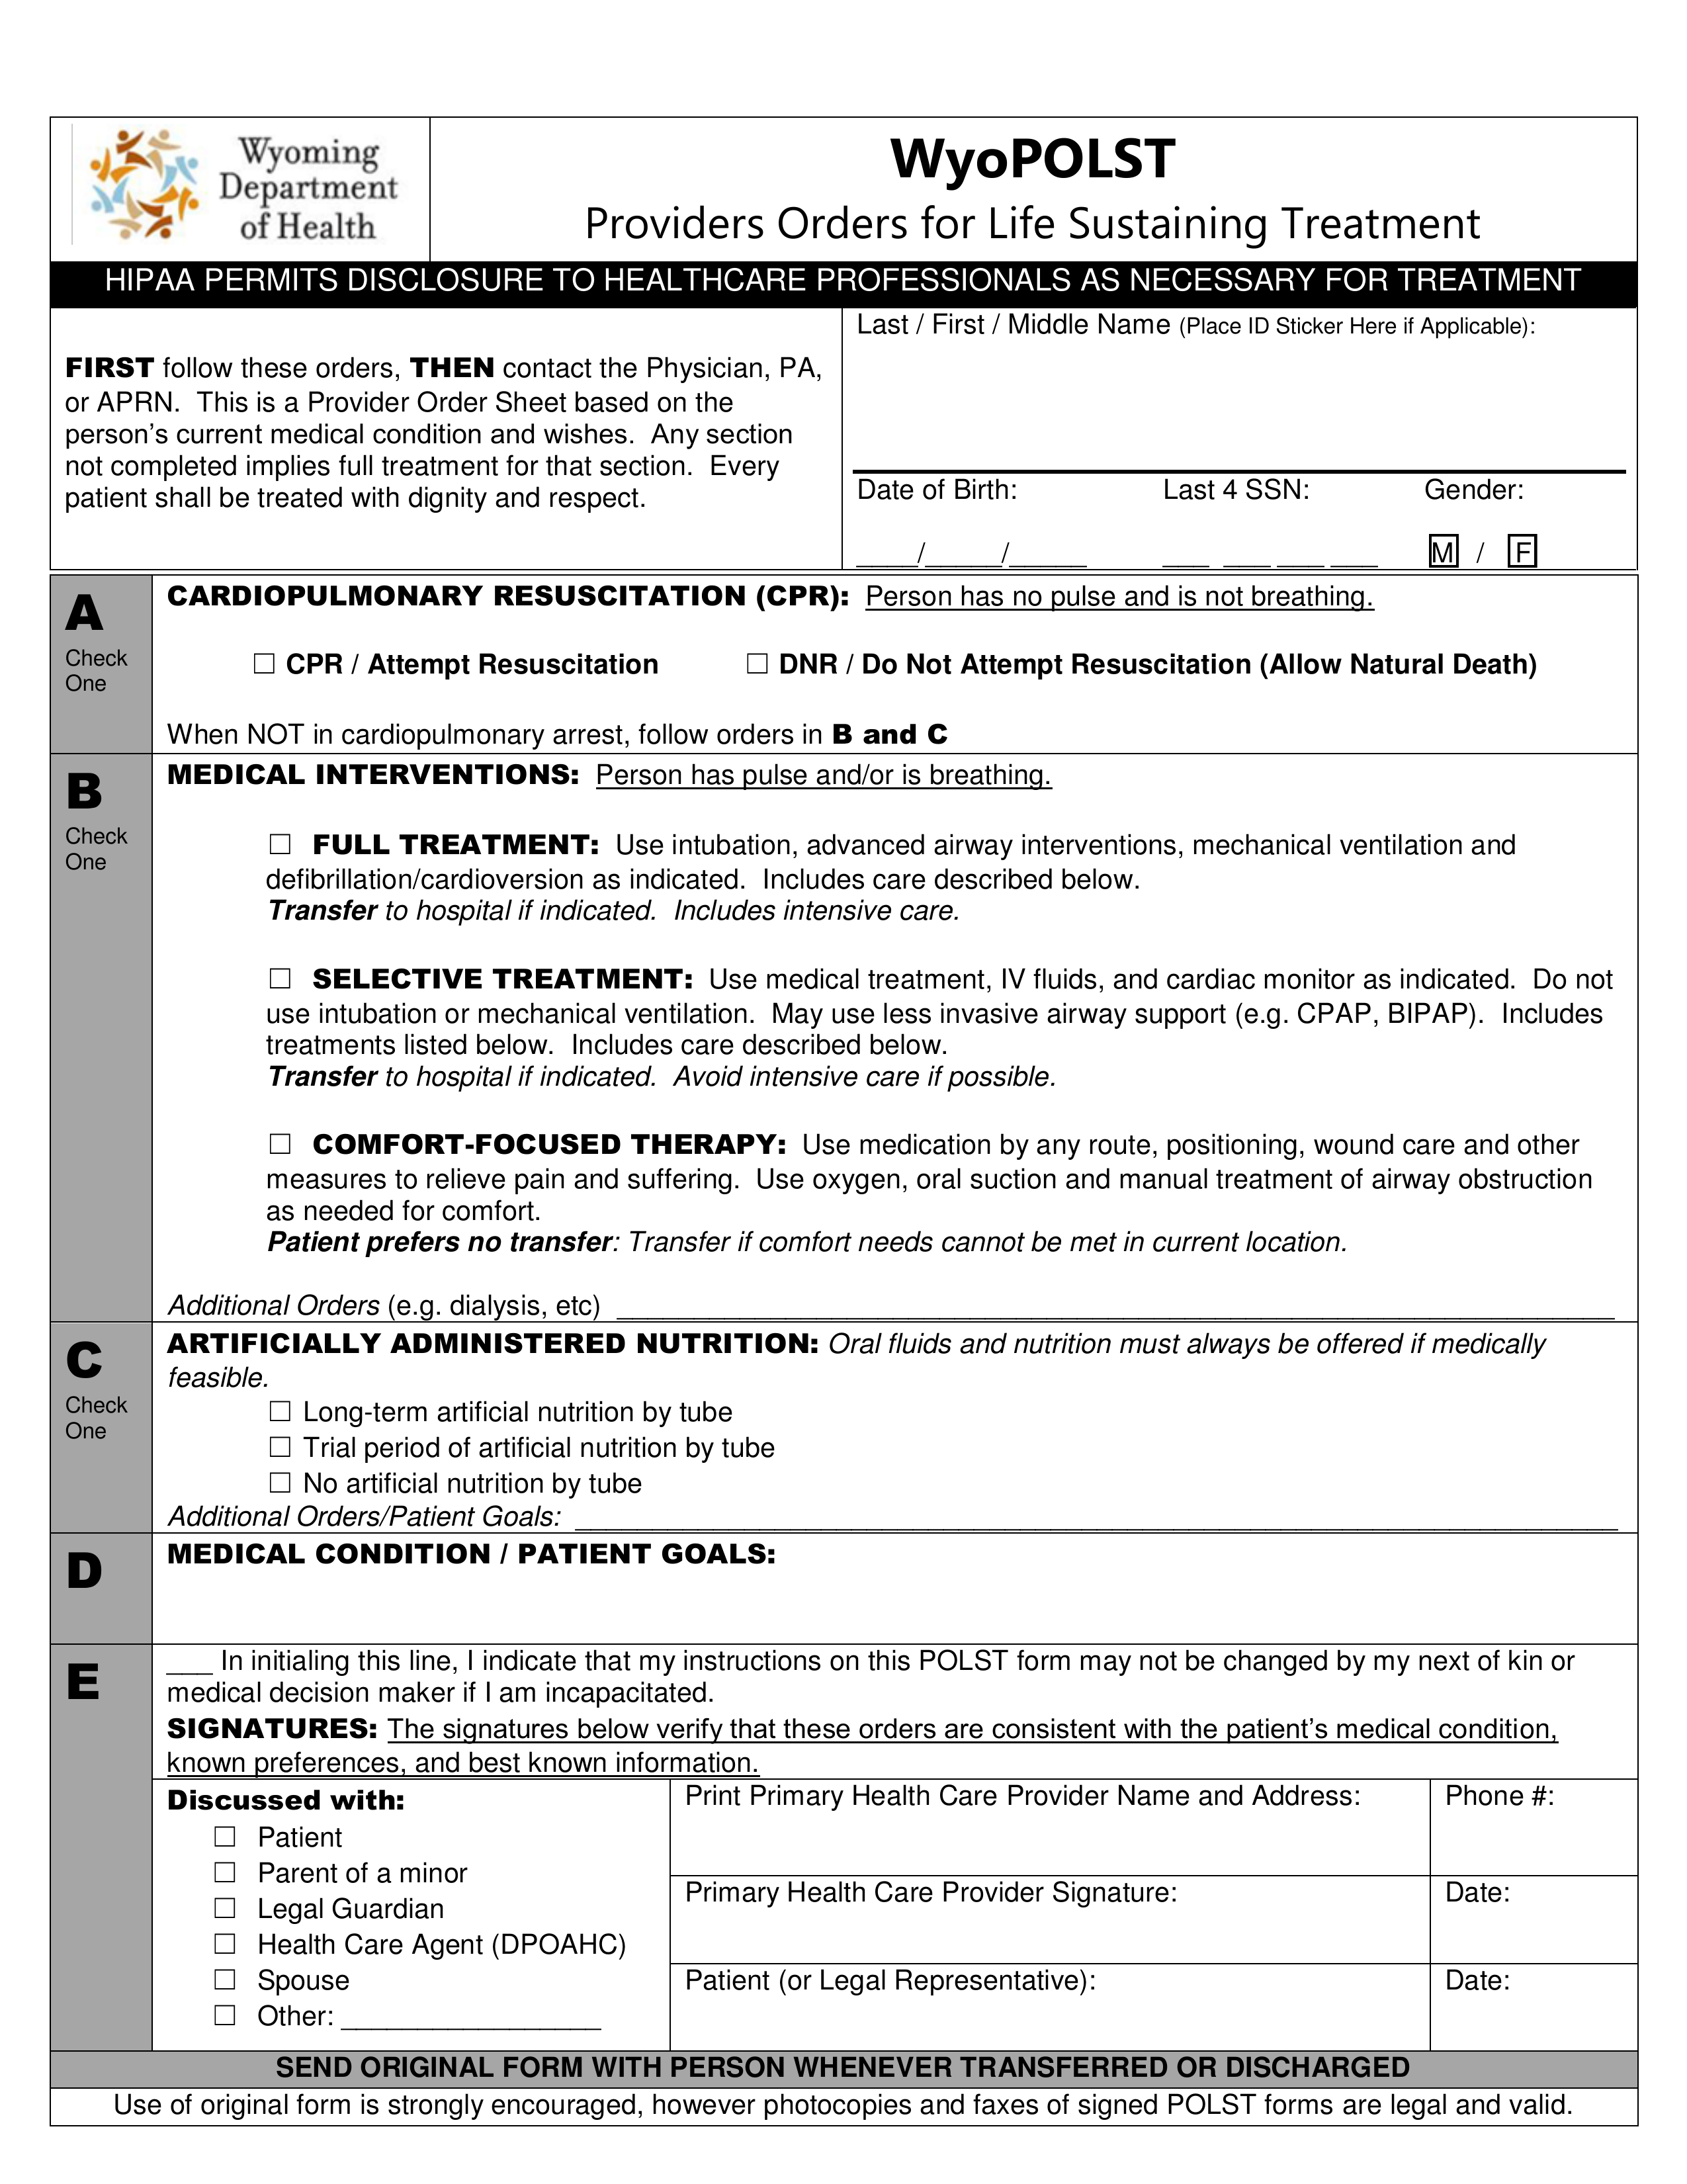 Wyoming Do Not Resuscitate (DNR) Order Form